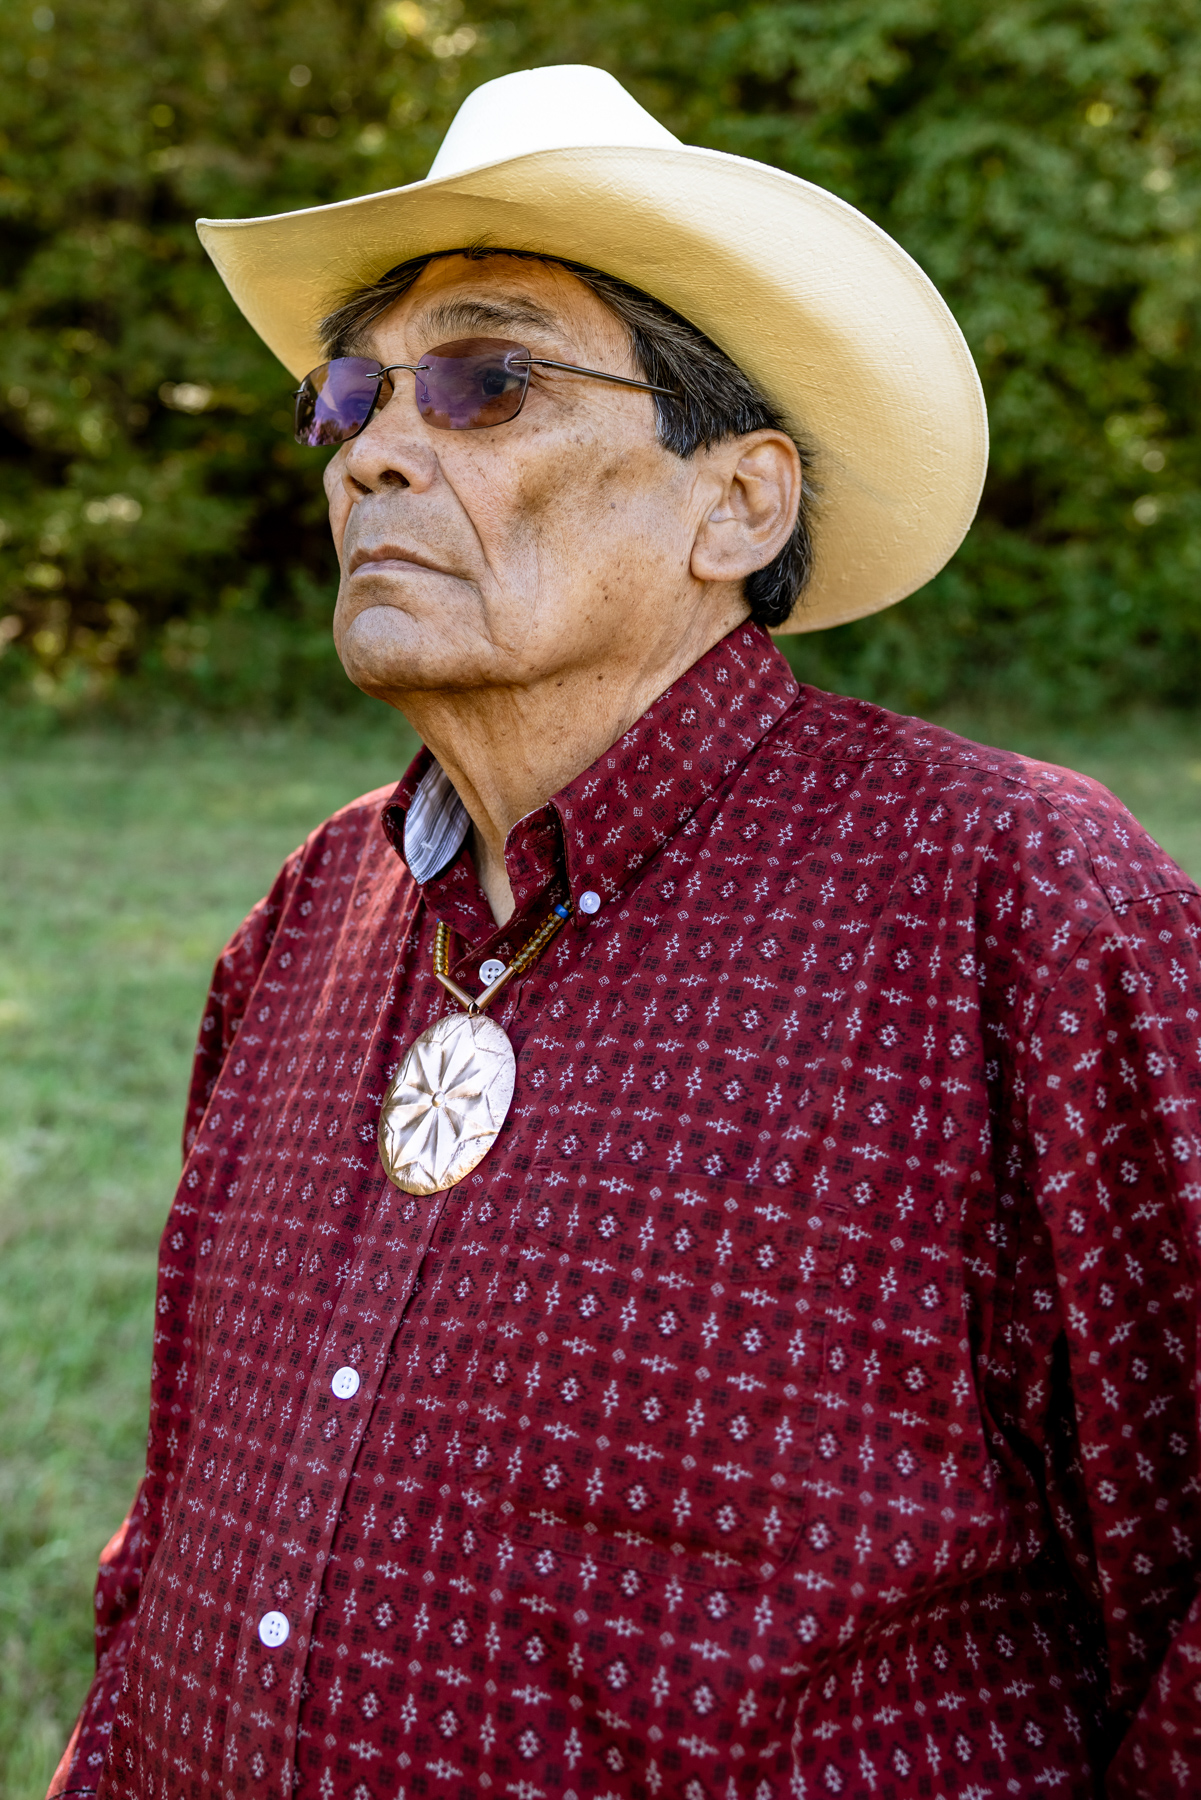 U-ga-se-s-di Nu-s-dv-a-ne-hv (Culture Keeper) As a member of the Cherokee Nation living in the Mothertown lands of North Carolina, Tribal Elder, Tom is revered for his perspective on life. He gives freely his knowledge to others to help all people connect to the land and find their purpose.